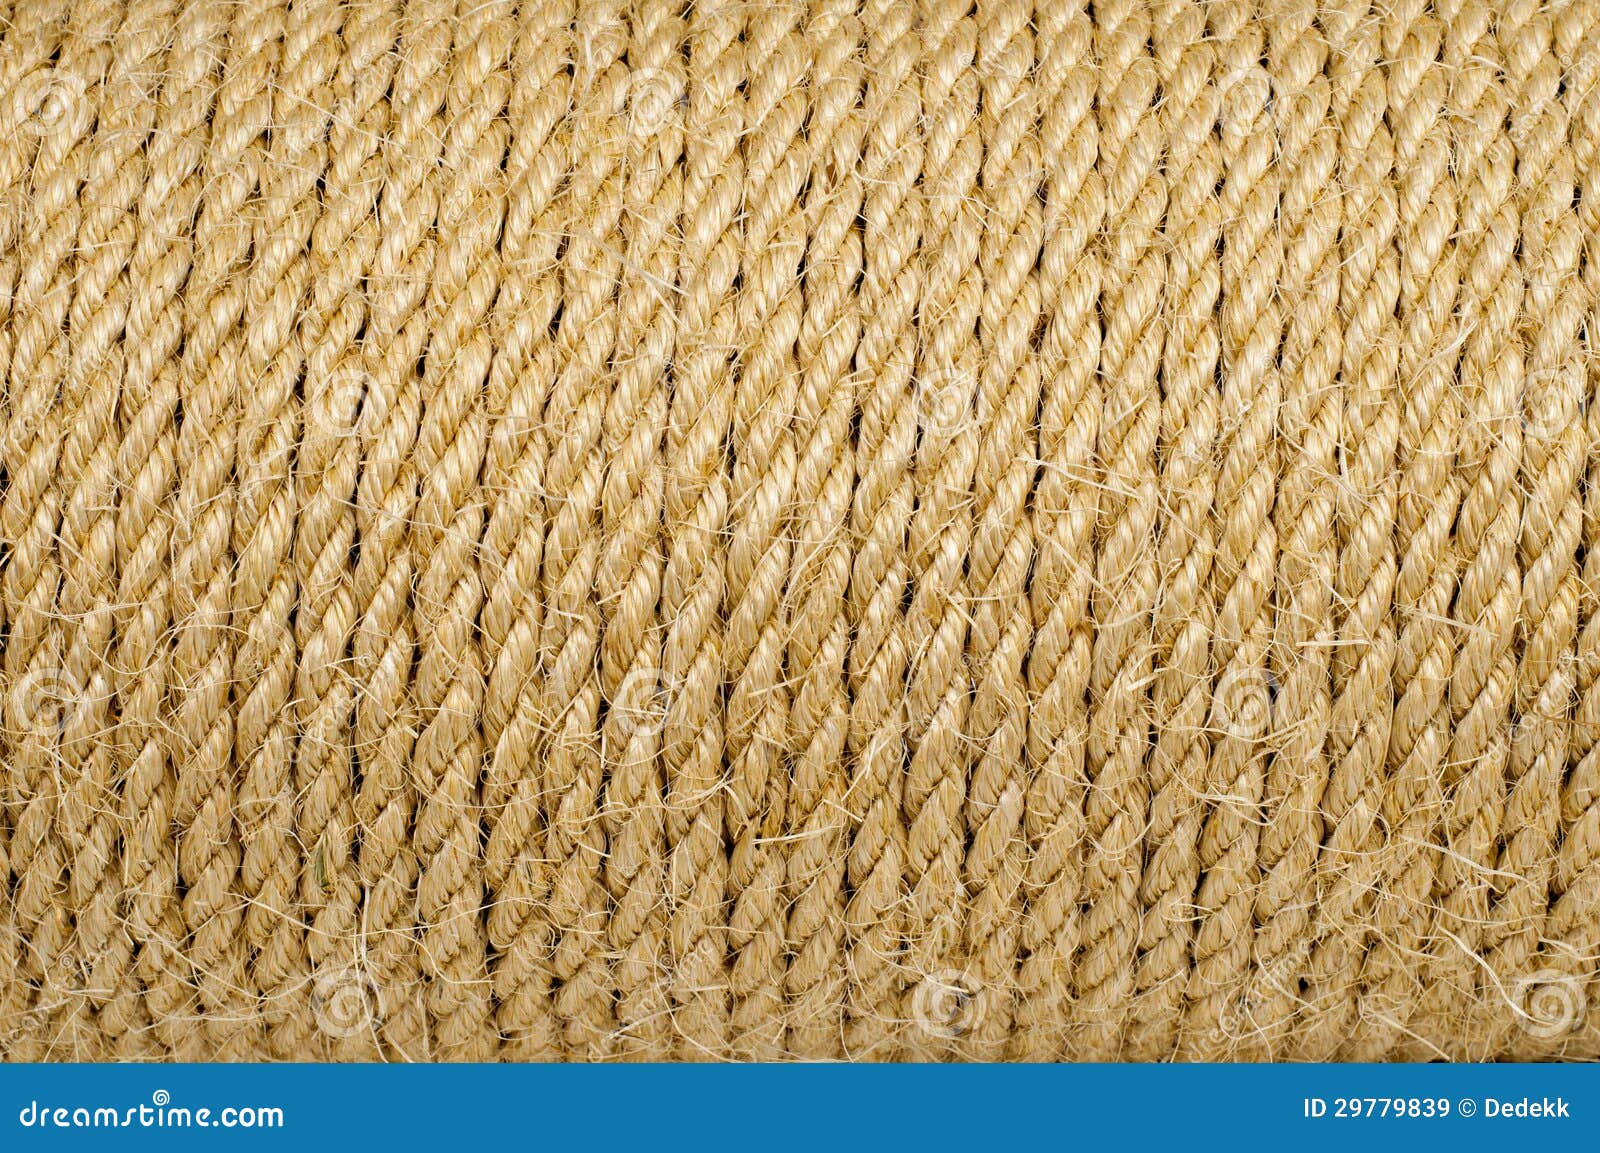 Long rope stock image. Image of linen, industry, revival - 29779839